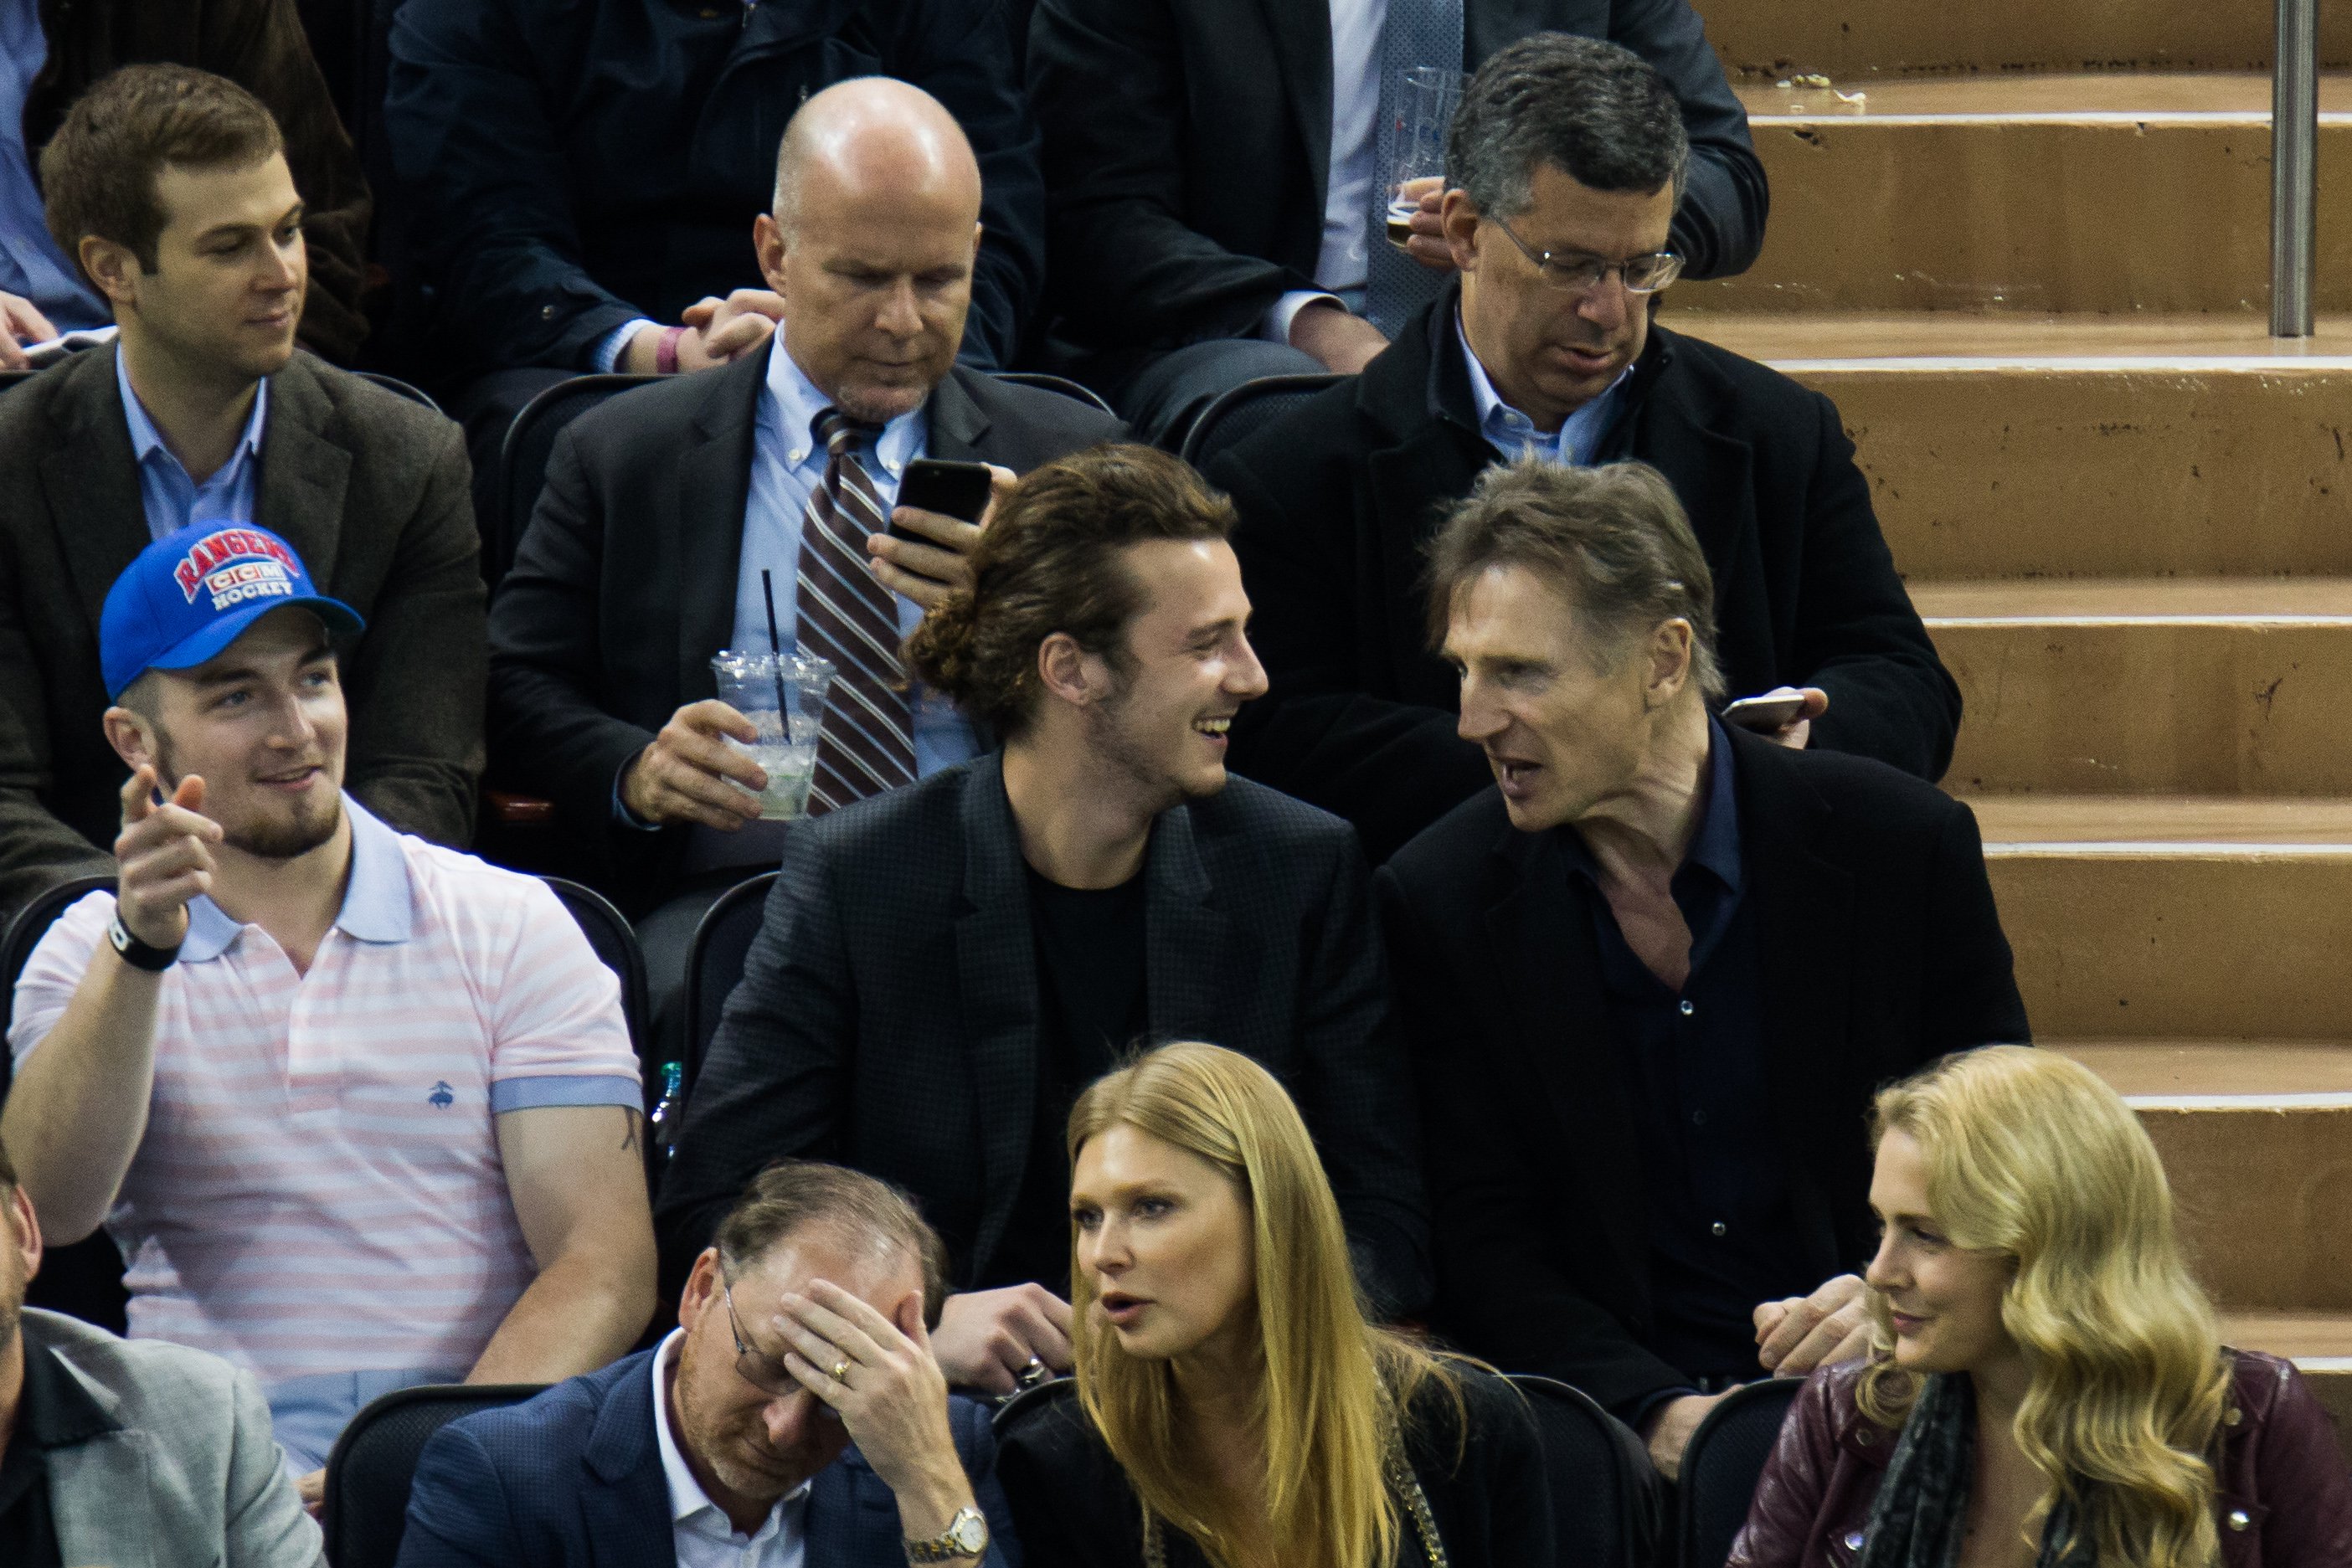 Liam Neeson and his sons, Daniel Neeson and Micheal Neeson, attending New York Rangers Vs. Boston Bruins game at Madison Square Garden on March 23, 2016 in New York City. / Source: Getty Images